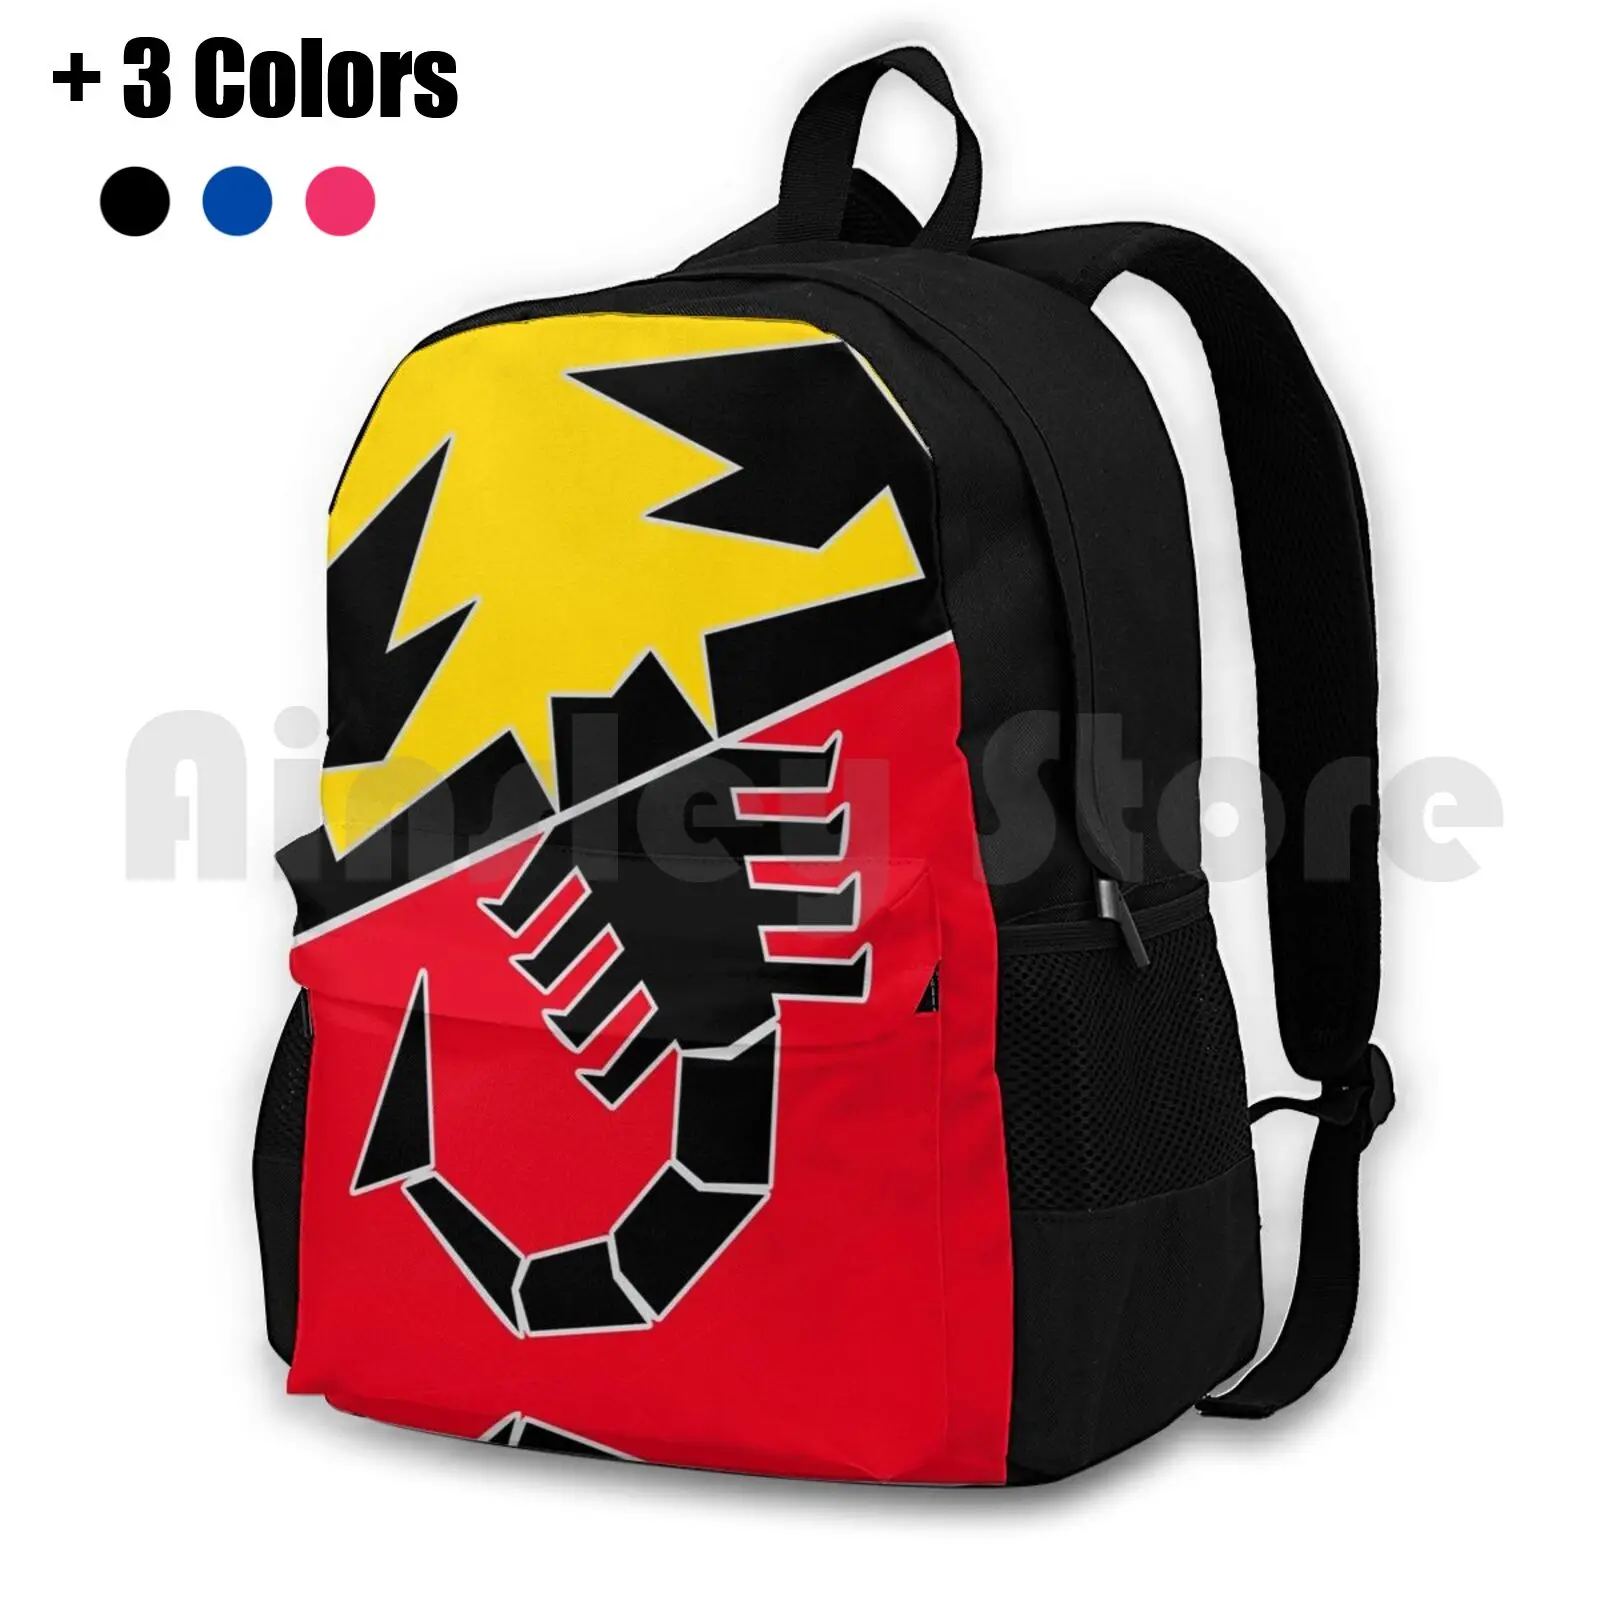 

Abarth Scorpion Outdoor Hiking Backpack Riding Climbing Sports Bag Abarth Scorpion Symbol Cars Italy Fiat Racing Sports 500